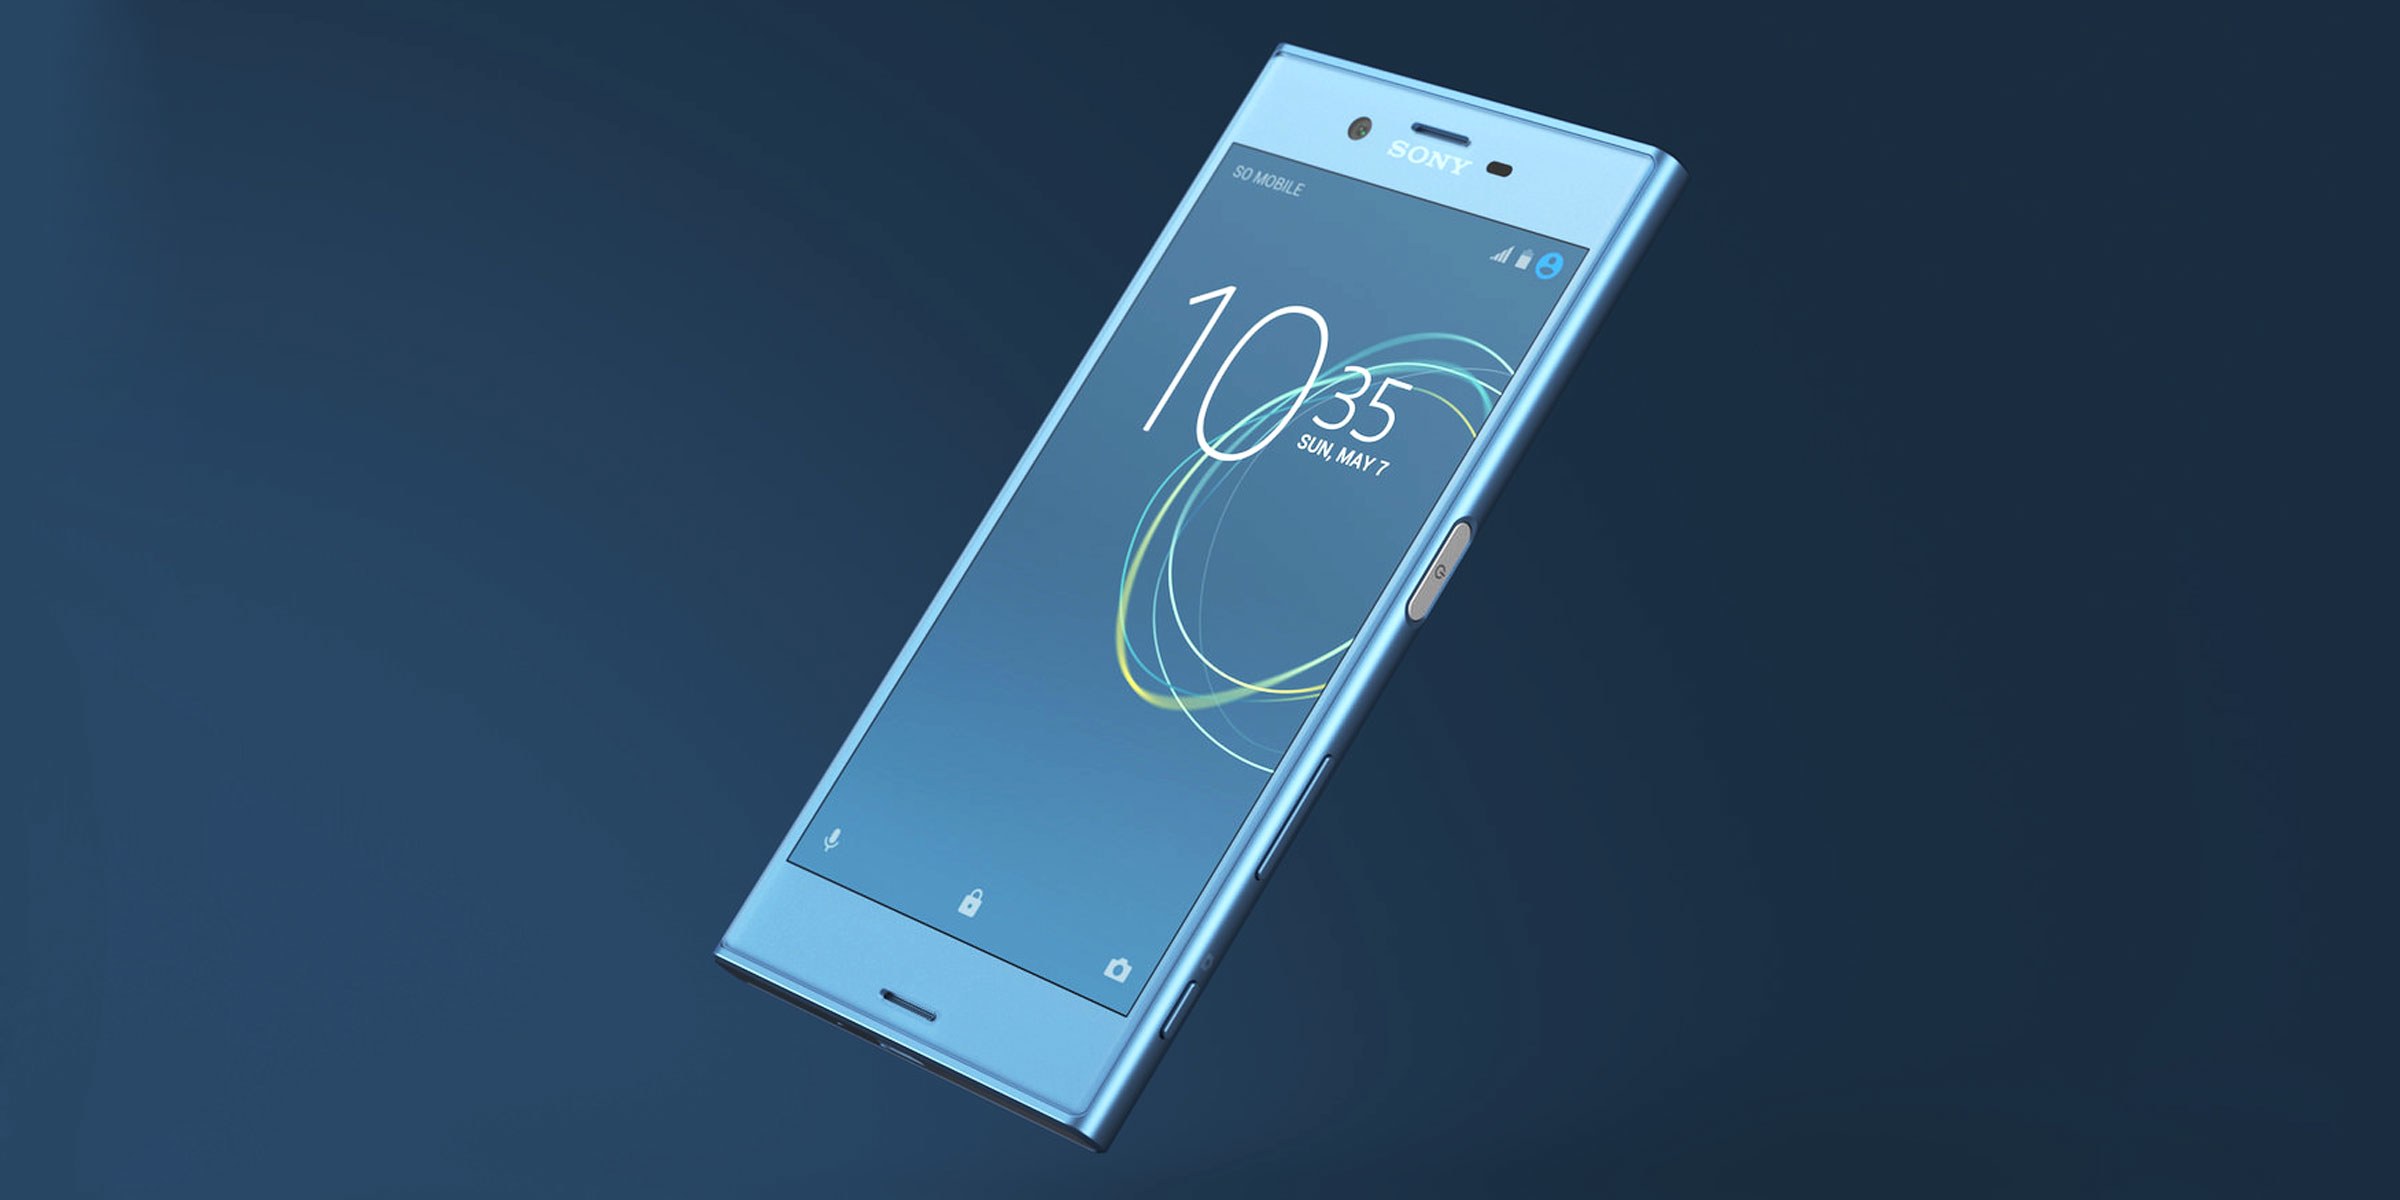 Sony Xperia XZ Premium is now available for purchase in the United States